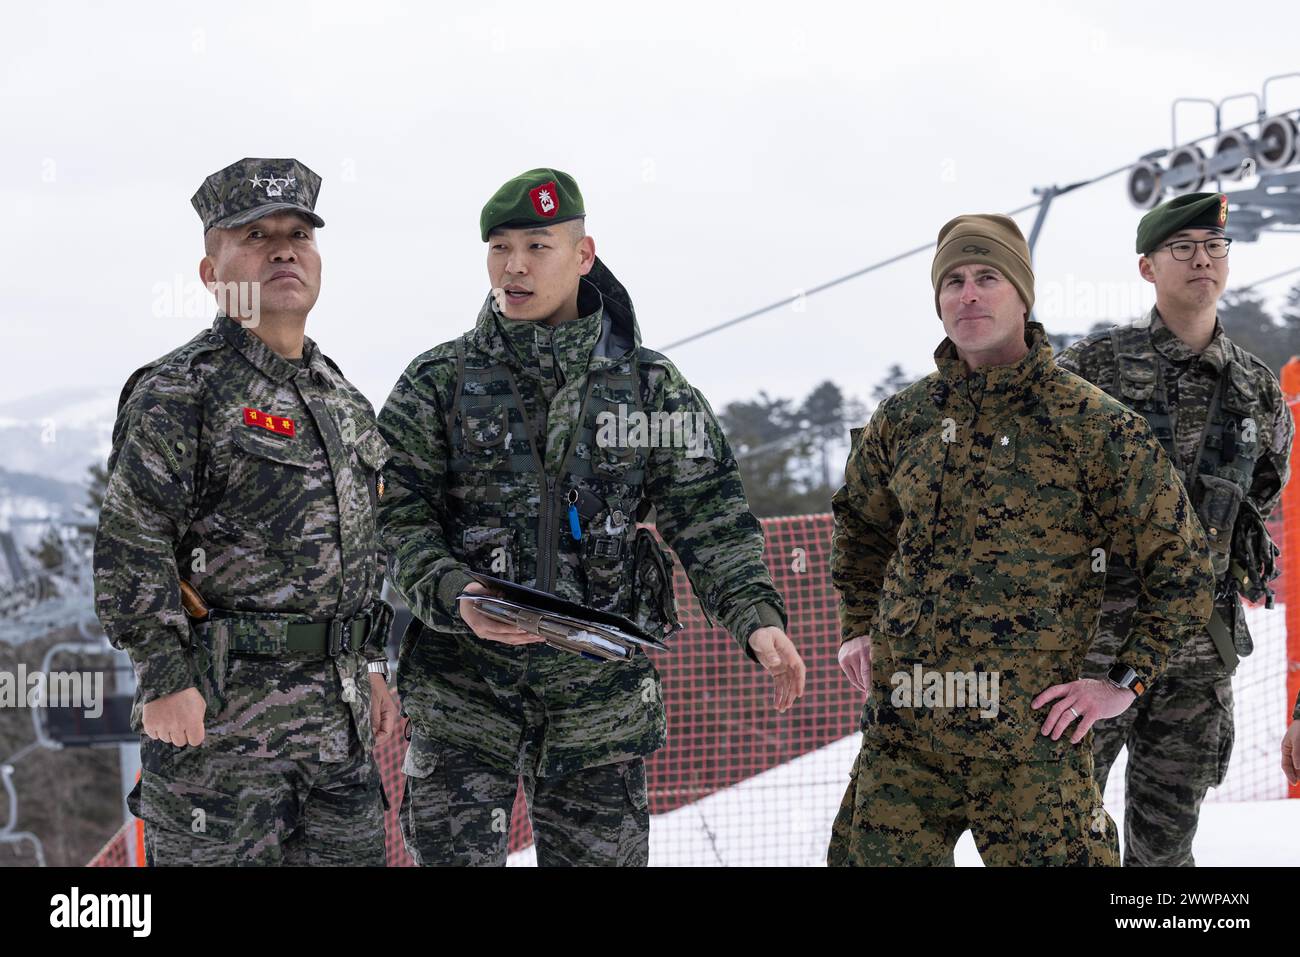 Republic of Korea Marine Corps Commandant Lt. Gen. Kim Gye-hwan, far left, and U.S. Marine Corps Lt. Col. Christopher Macak, second to right, discuss the bilateral training taking place during Korea Viper 24.1 at Pyeongchang, Republic of Korea, Feb. 14, 2024. In its first iteration, Korea Viper demonstrates the ROK-US Marine Corps ability to respond decisively in the region as a singular, unified force while strengthening relationships and trust between the two allies. The Marines are with 2d Battalion, 7th Marines. 2/7 is forward deployed in the Indo-Pacific under 4th Marine Regiment, 3d Mari Stock Photo